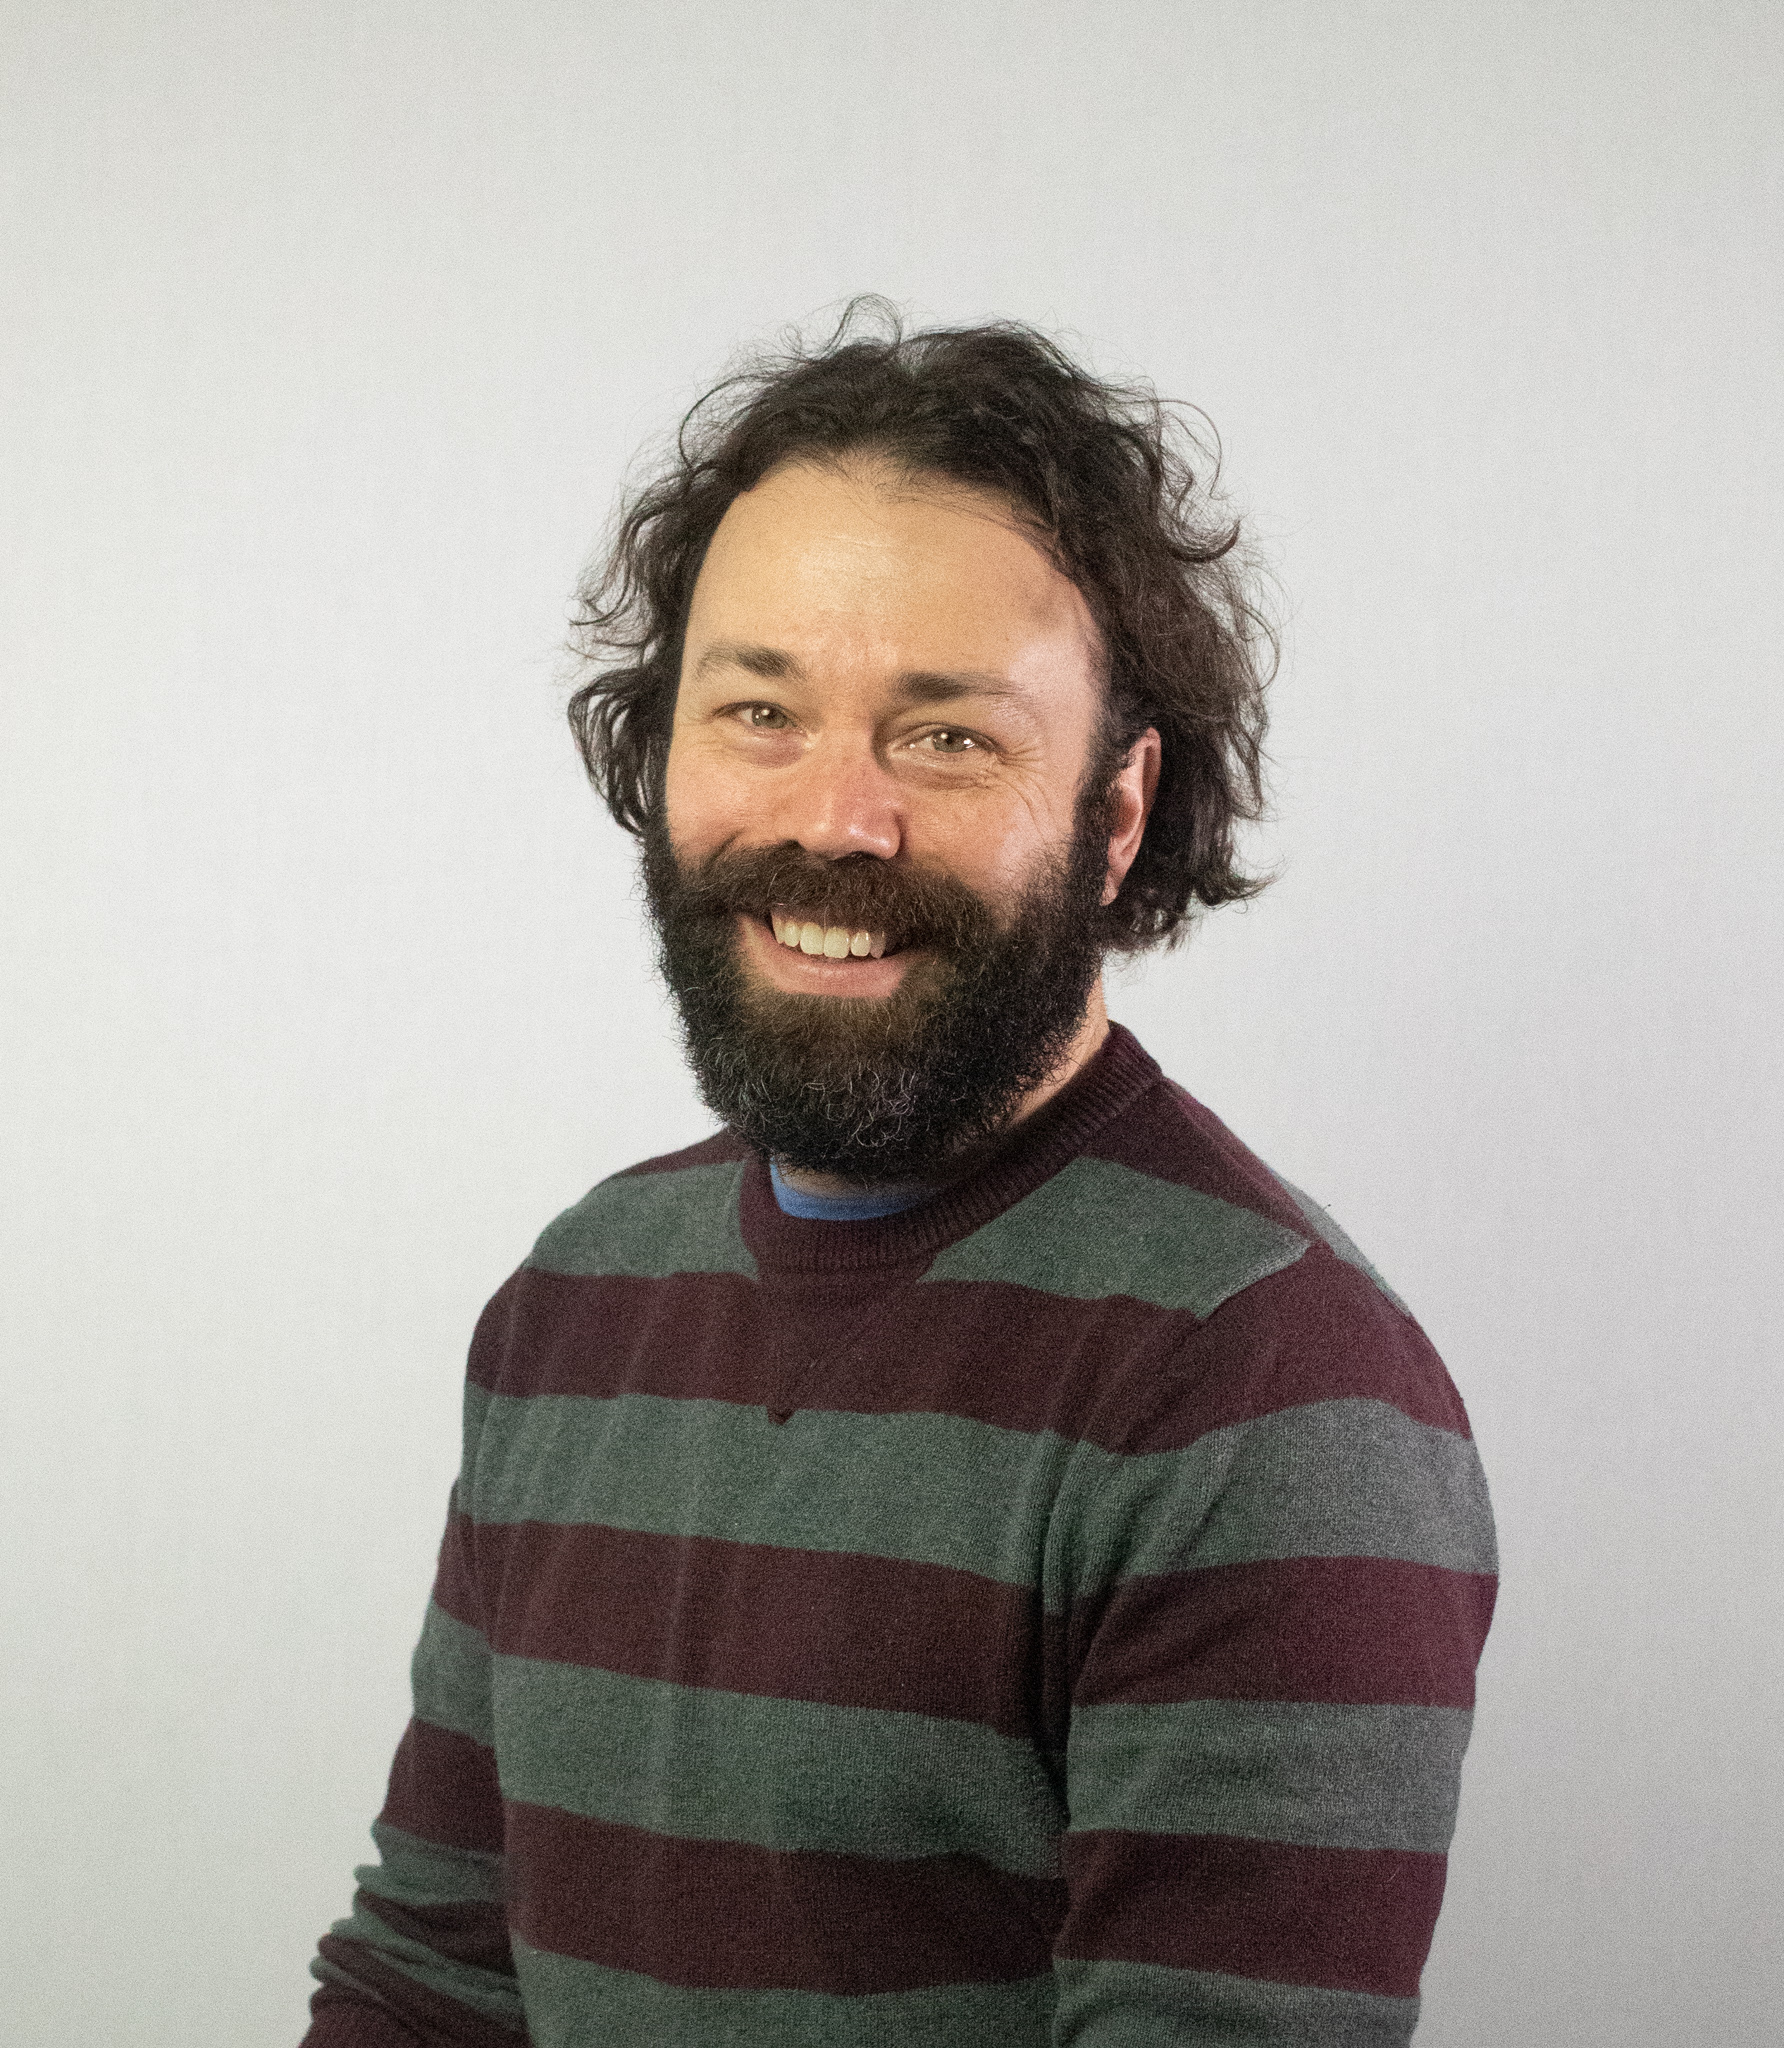 Photo of the author Steve Scaduto. Male, wavy long-ish brown hair, beard and mustache, visibly presenting as white, smiling toward camera.